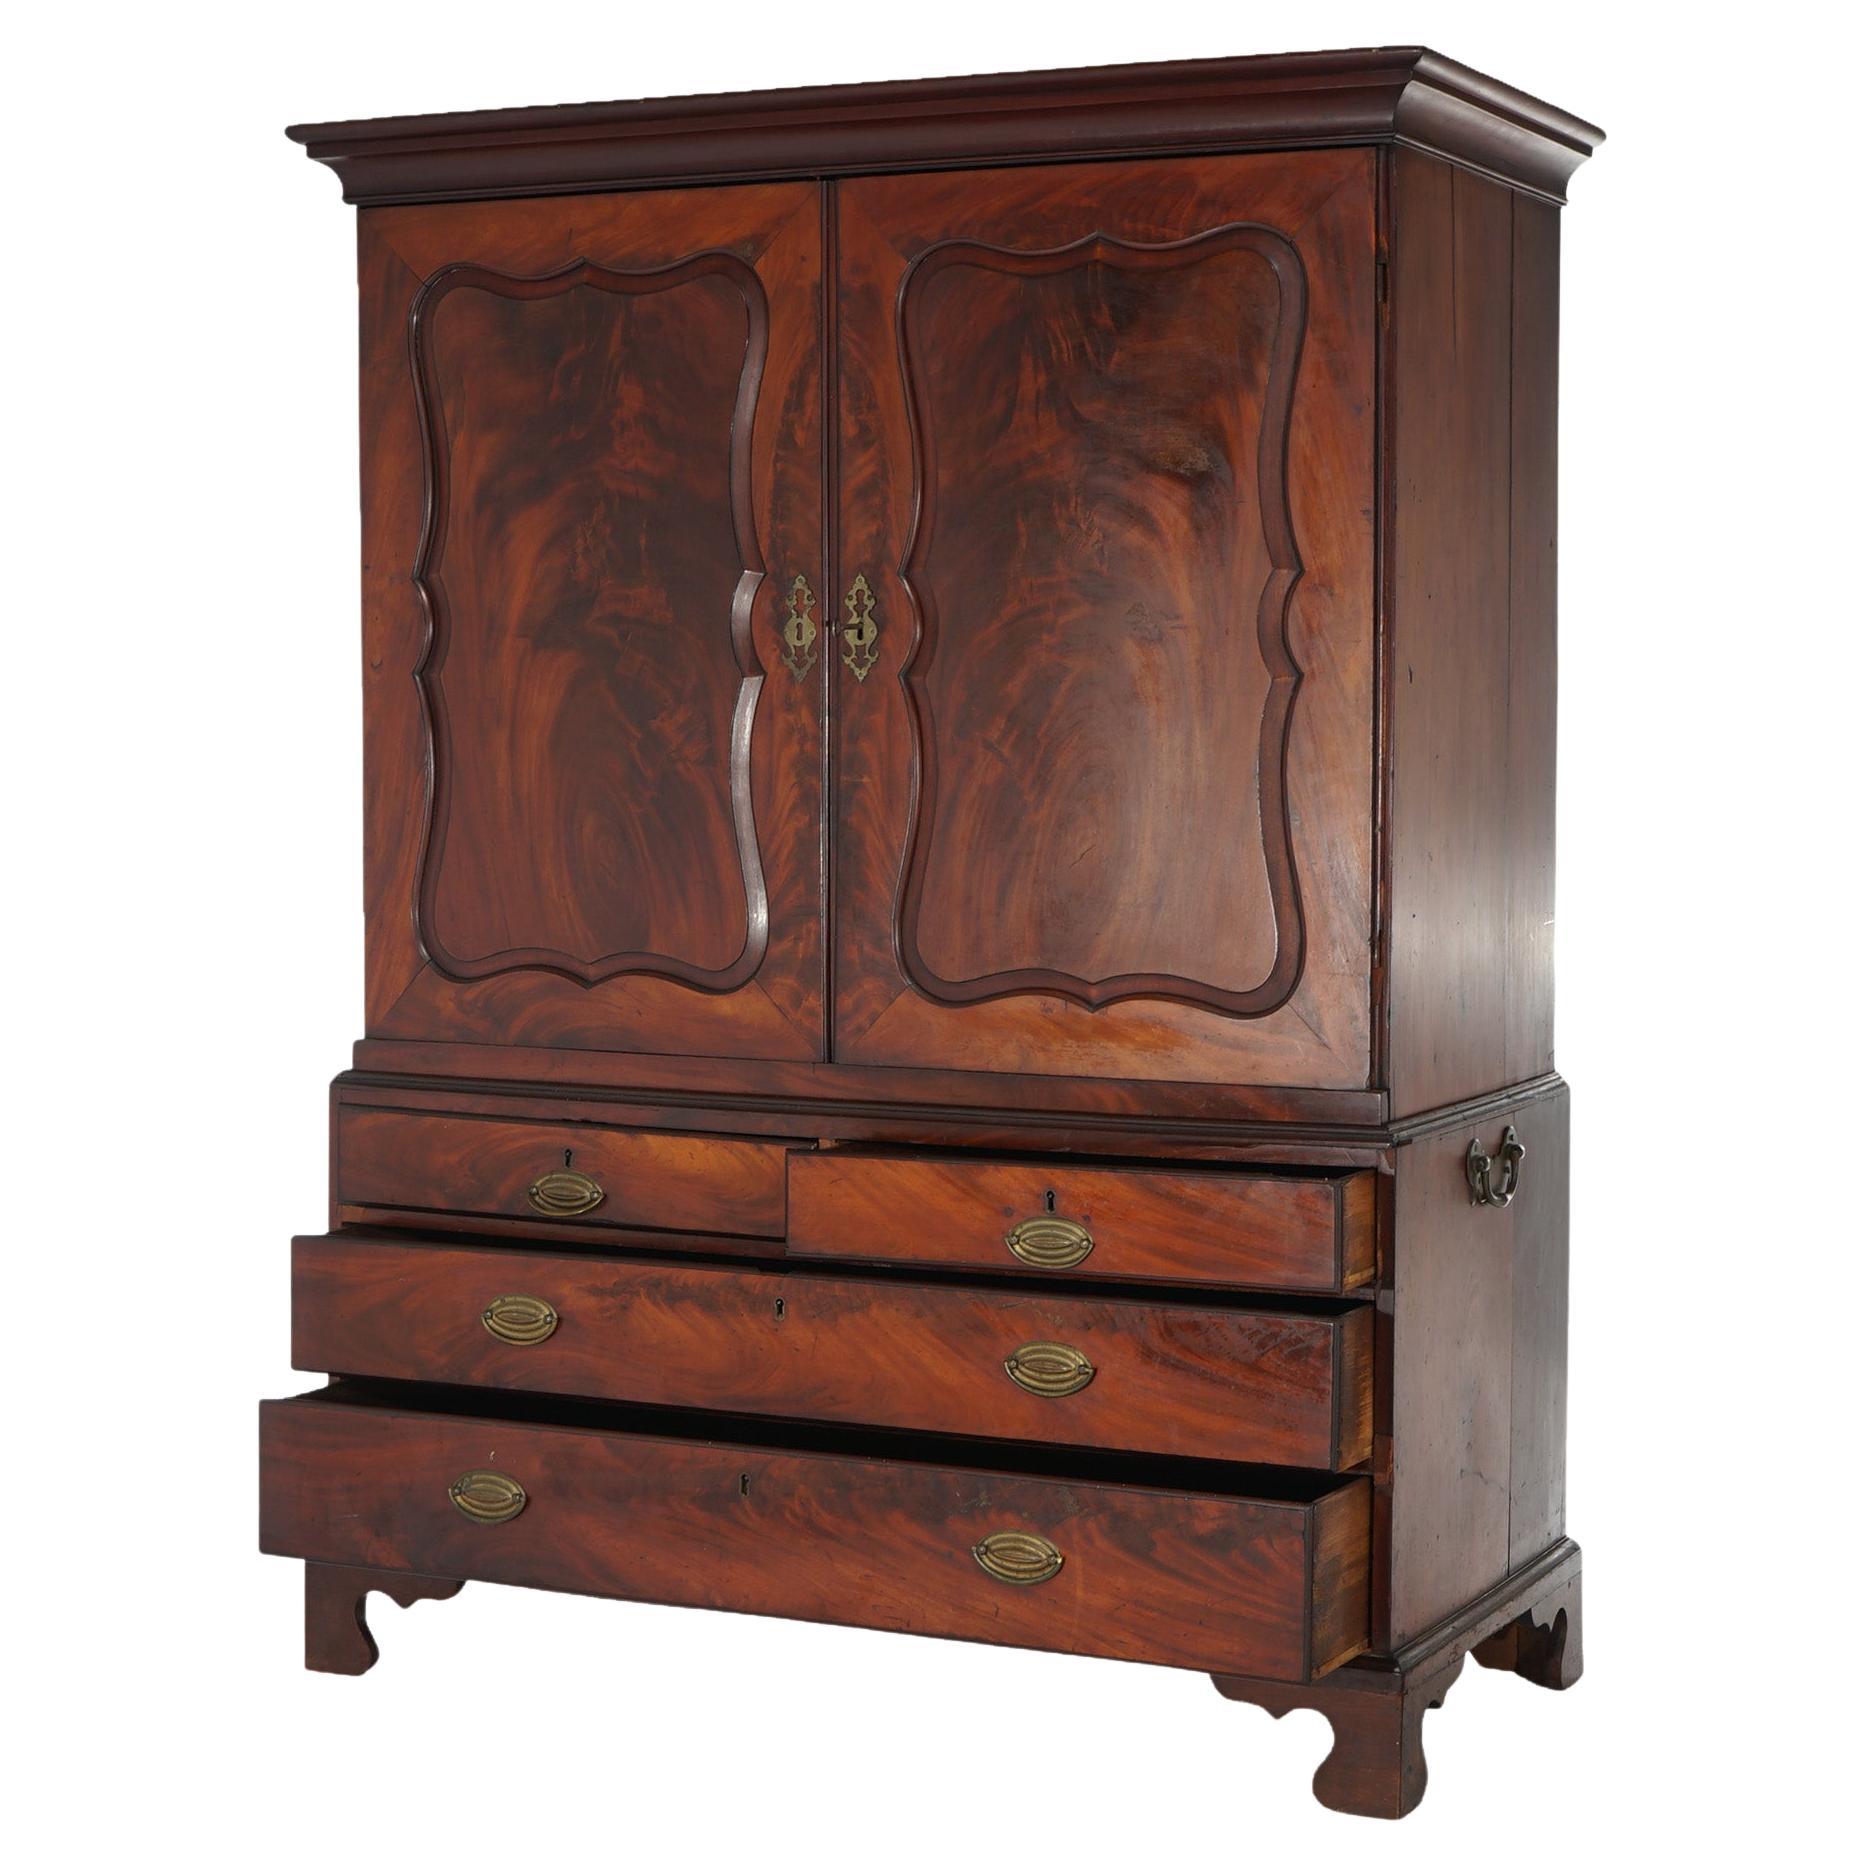 An antique English Georgian linen press offers flame mahogany construction with upper having paneled doors over lower case having two smaller drawers over two long drawers, raised on bracket feet, c1810

Measures - 67.75